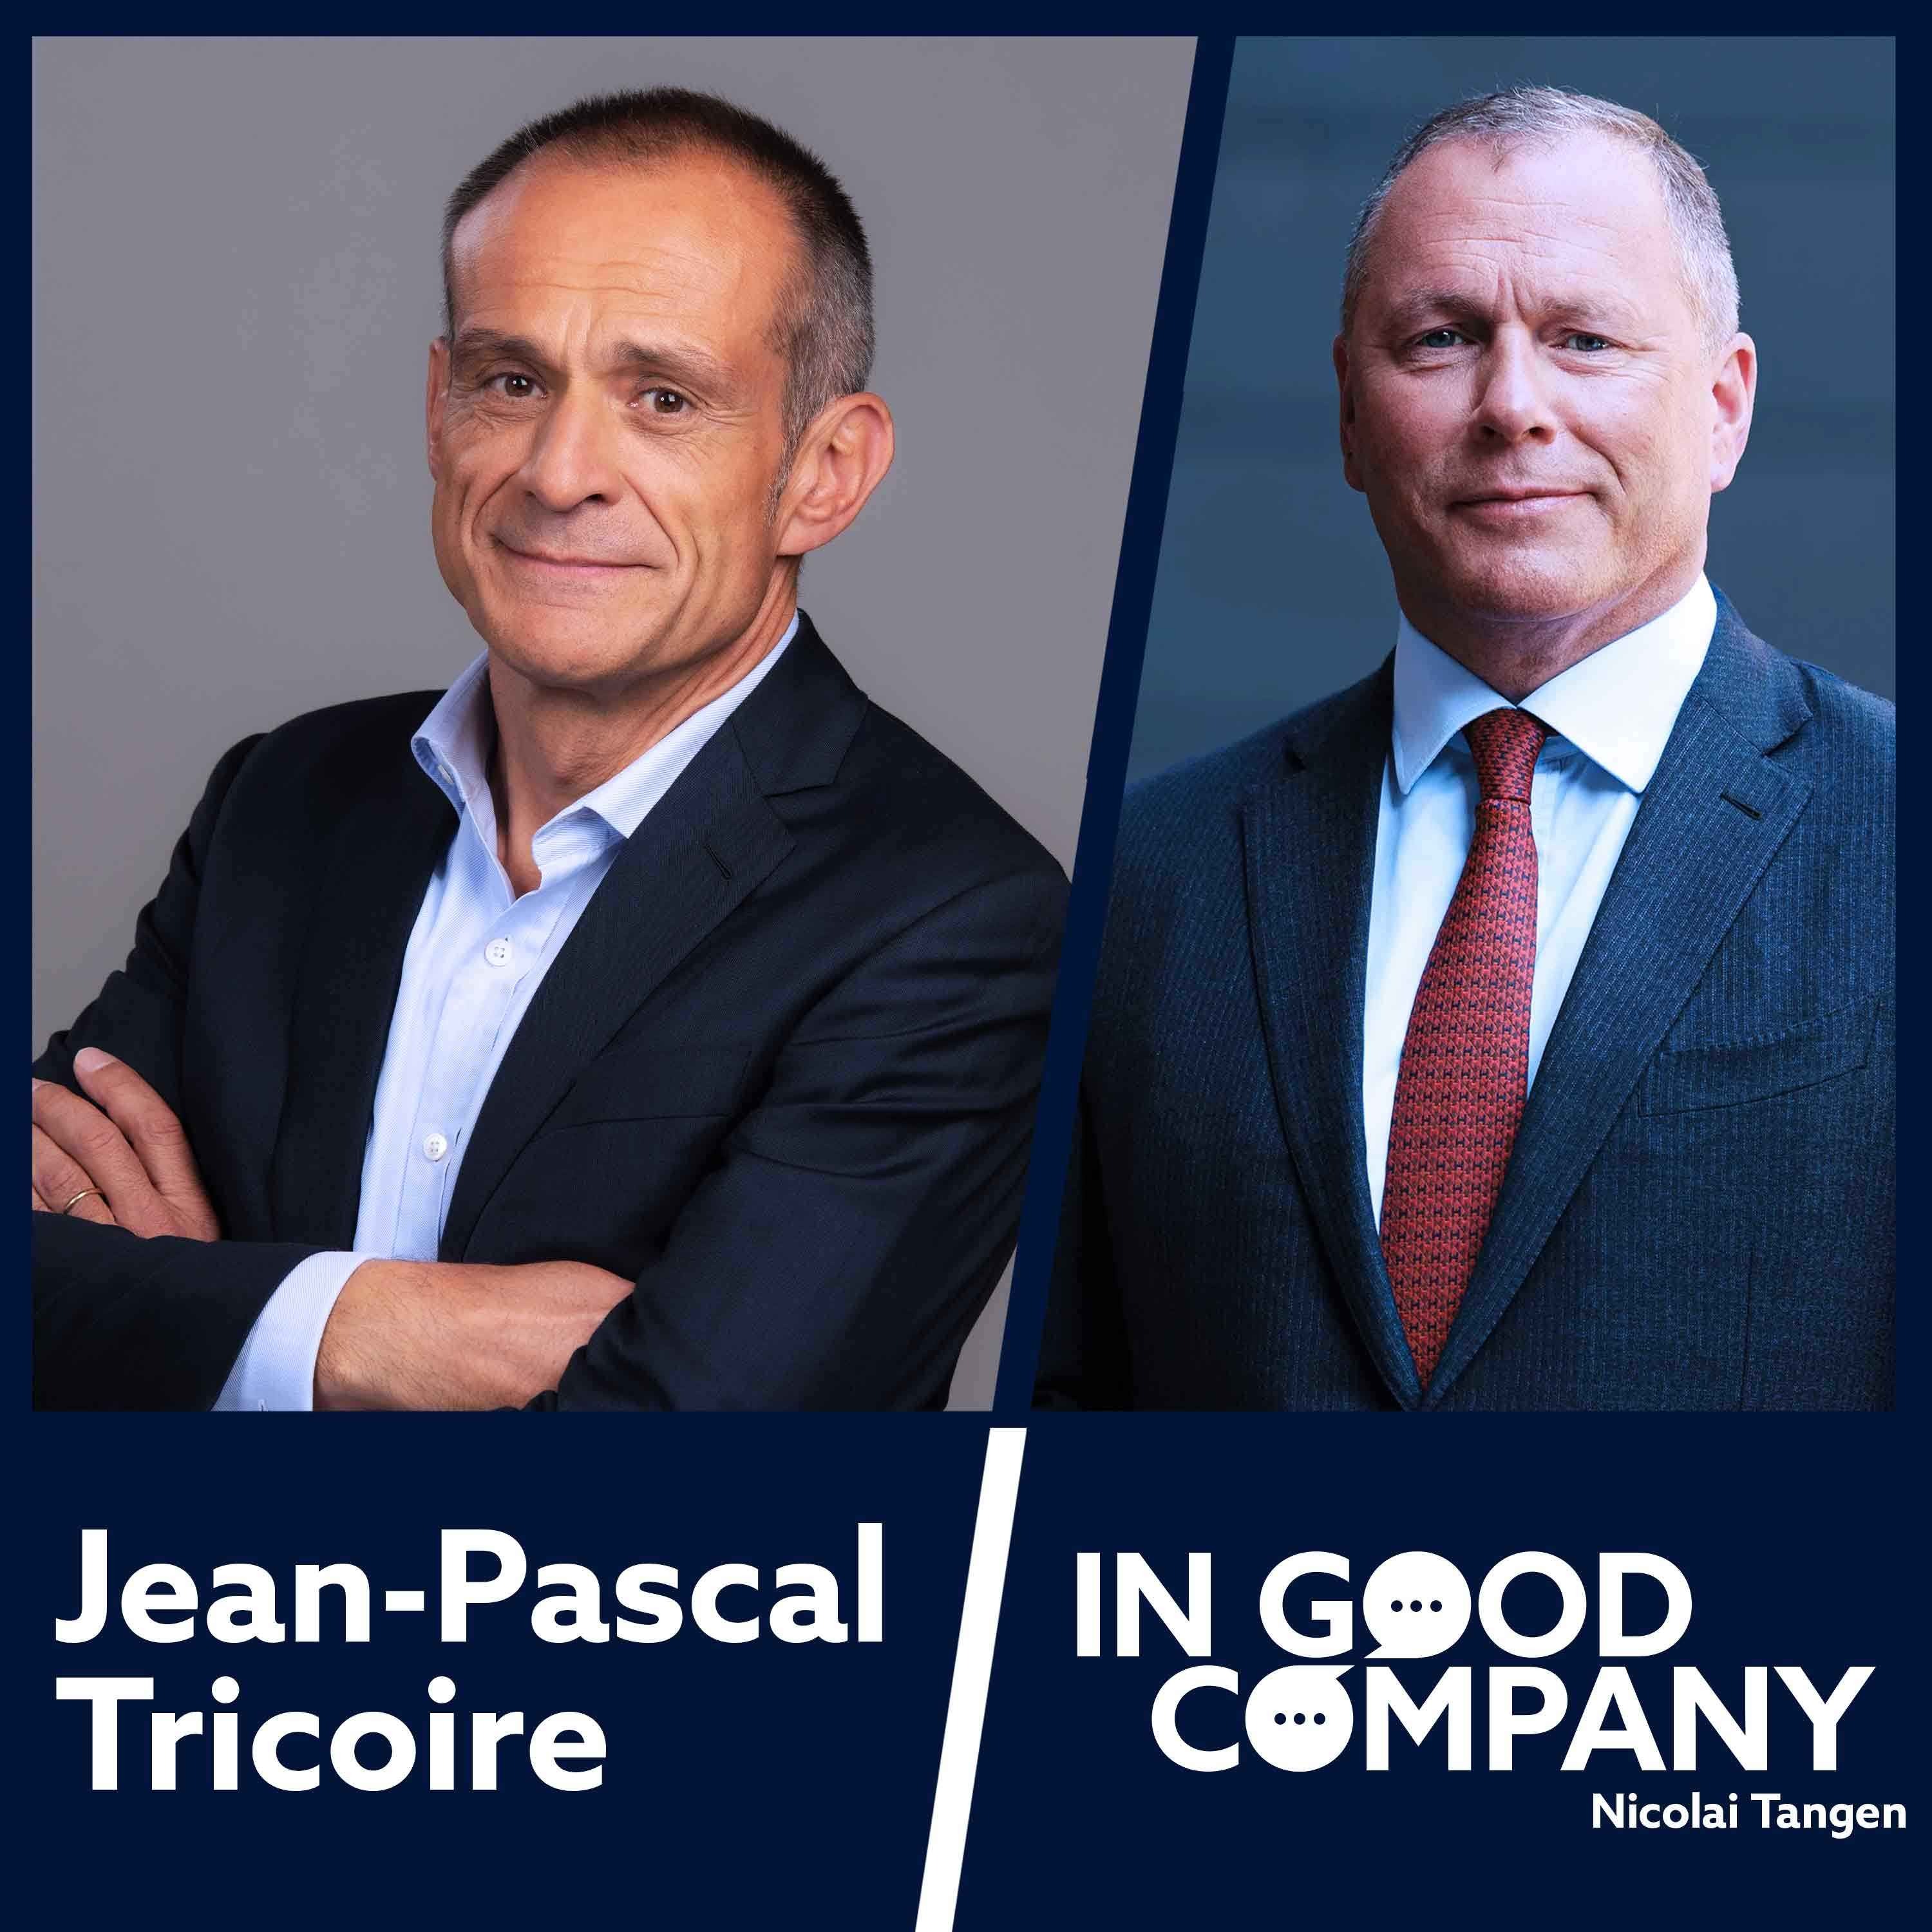 Jean-Pascal Tricoire CEO and Chairman of Schneider Electric